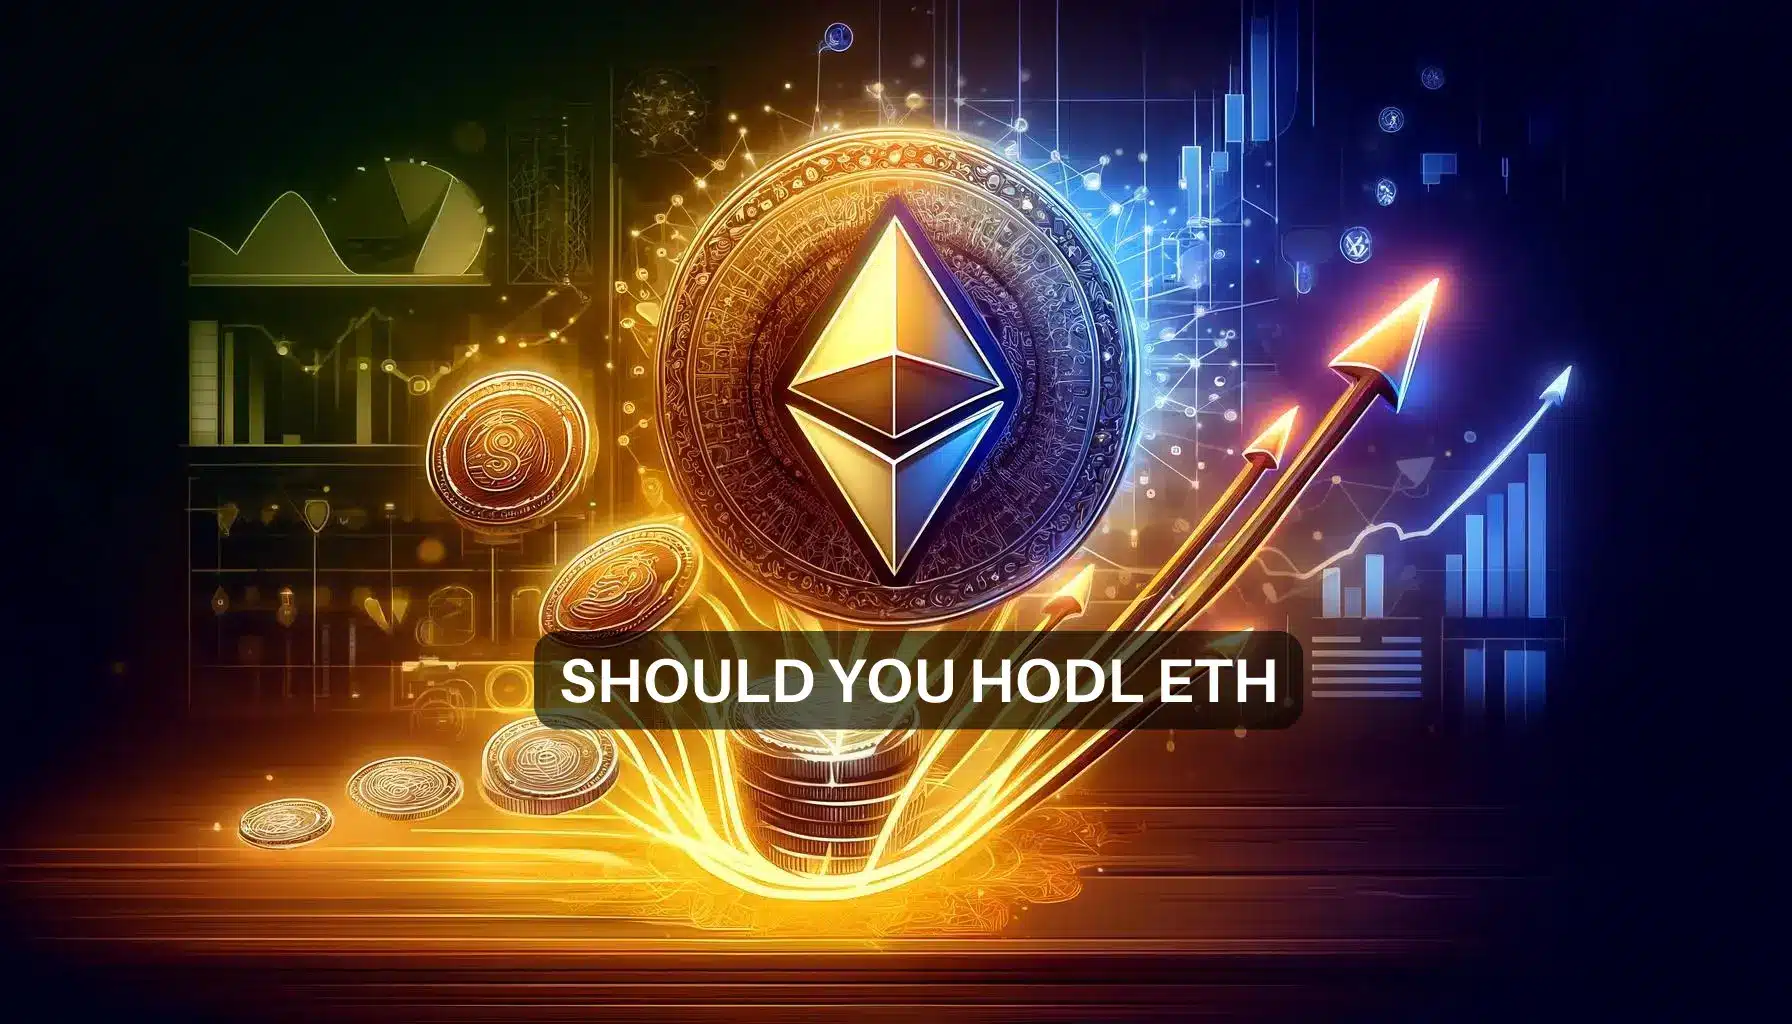 Ethereum – IF listed on the NYSE or Nasdaq, here’s how it might do…